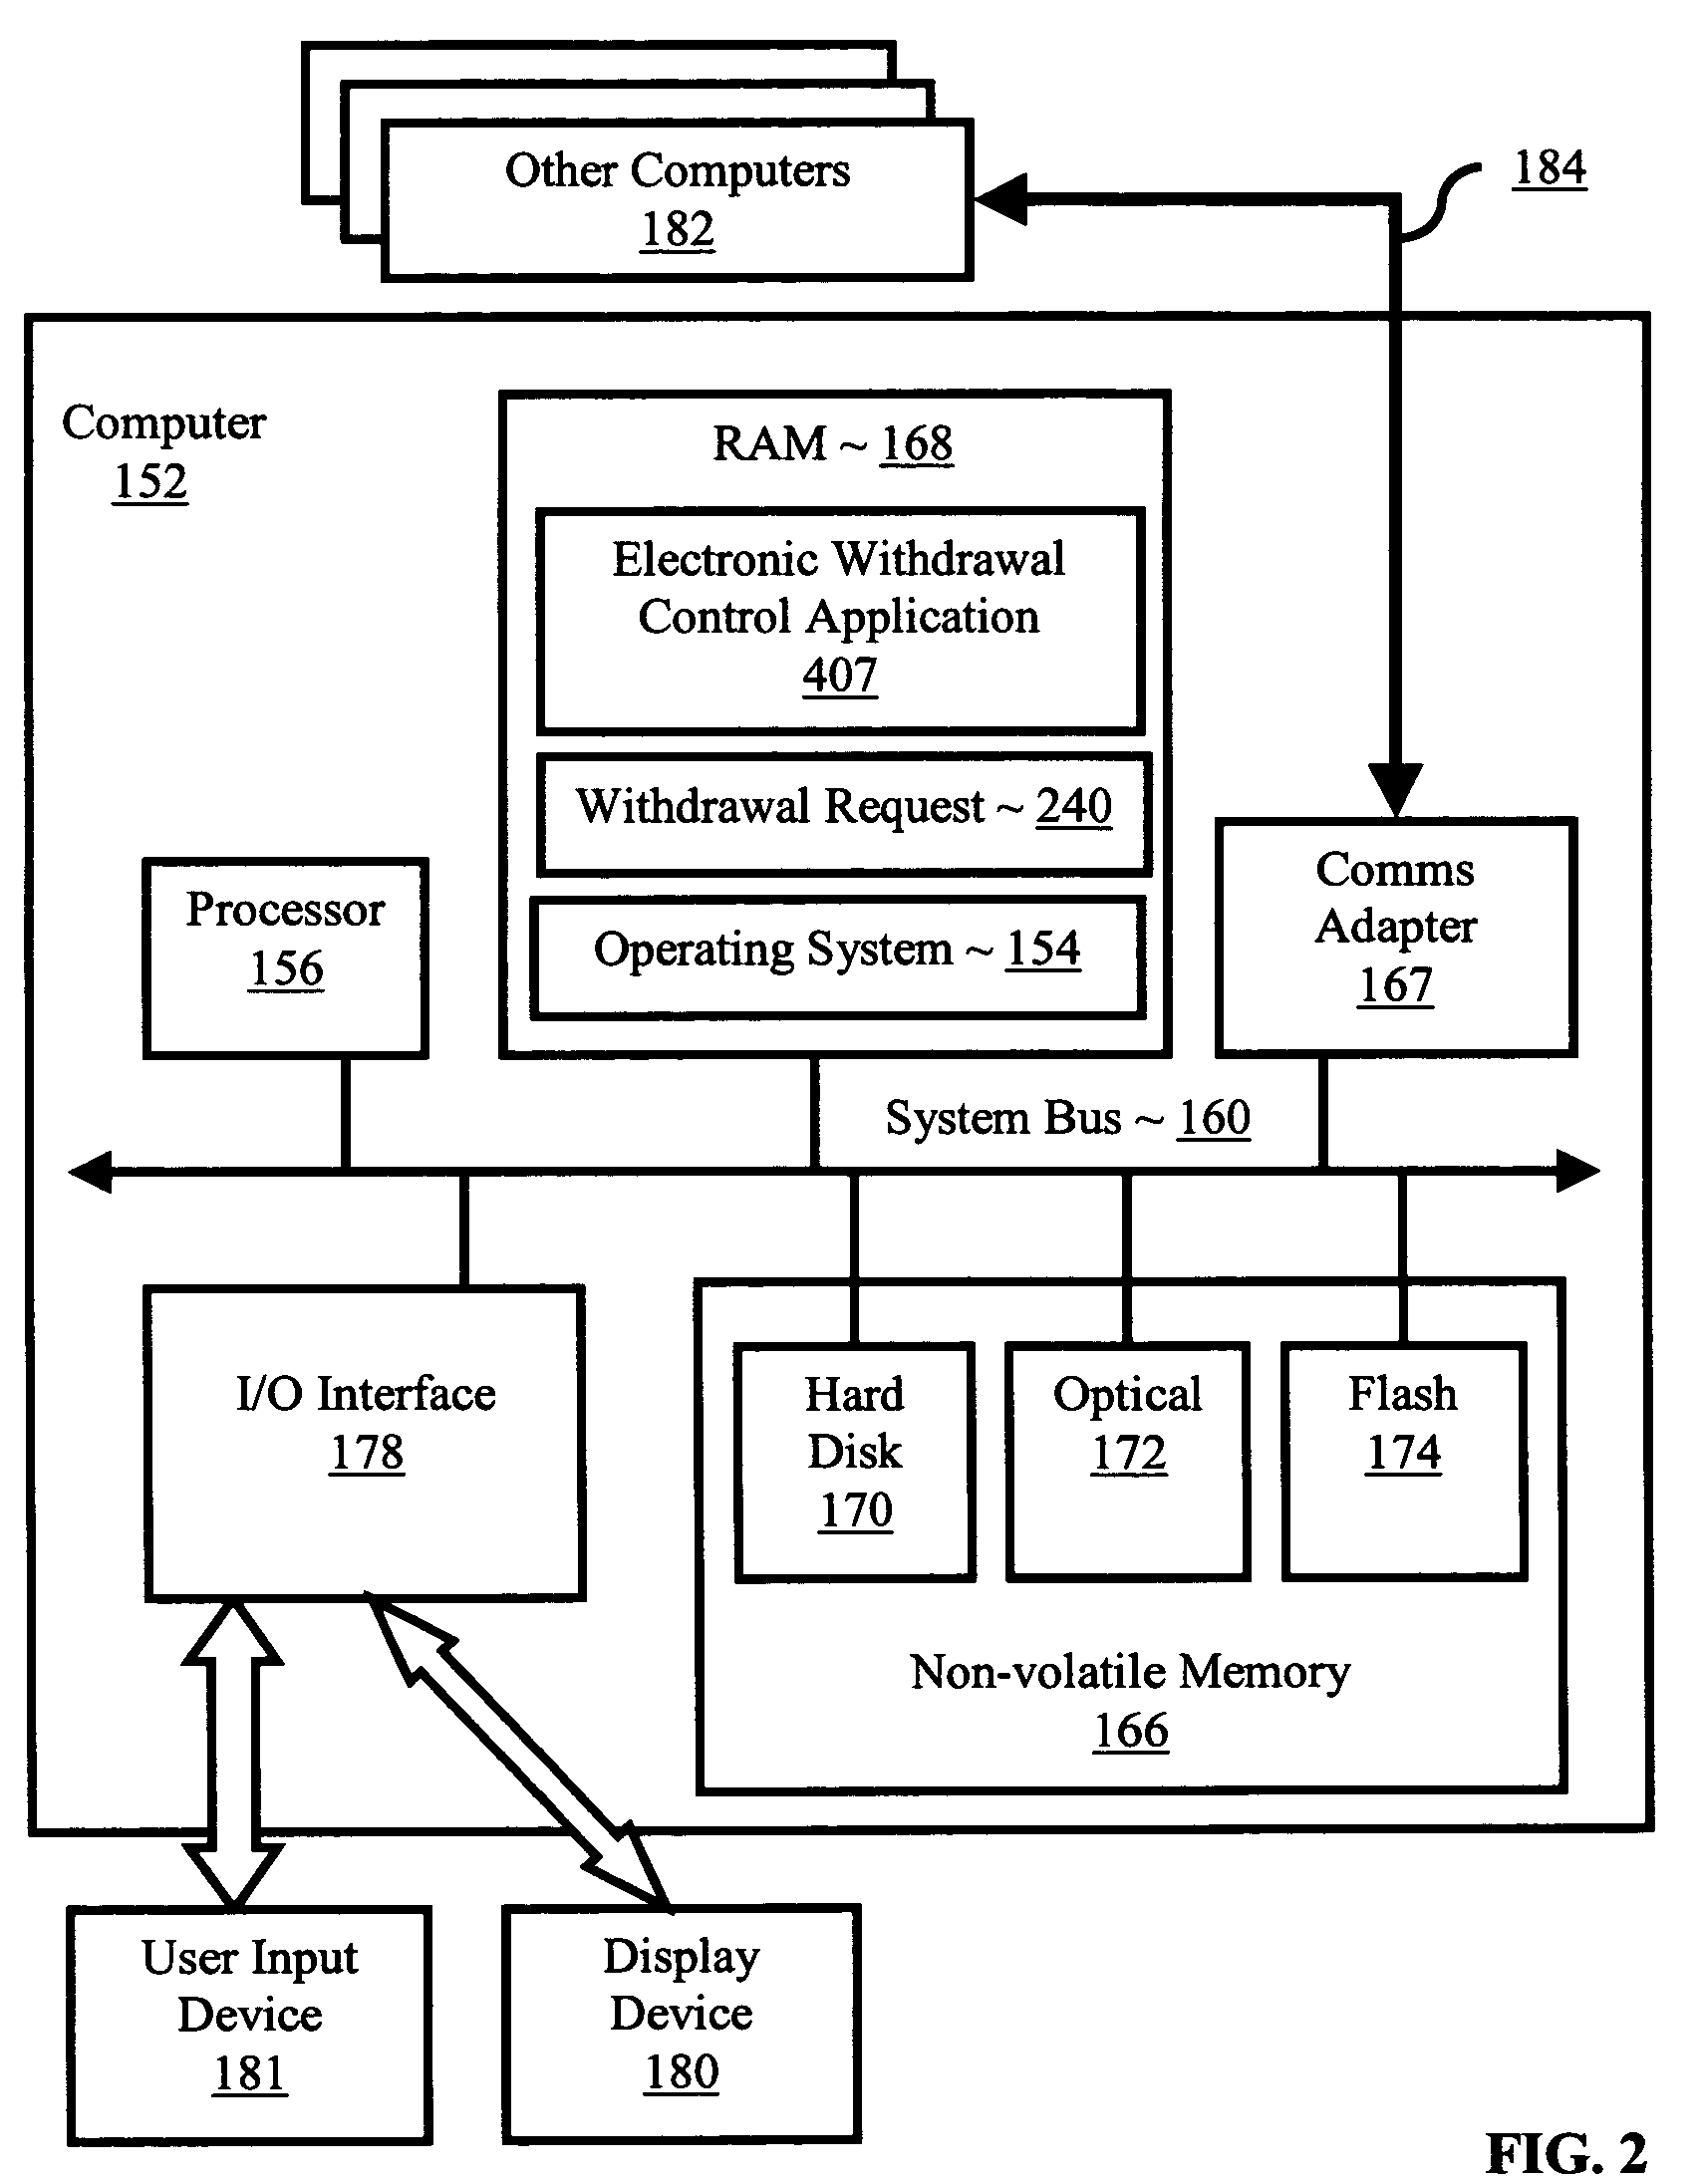 Controlling electronic withdrawals by a withdrawal device